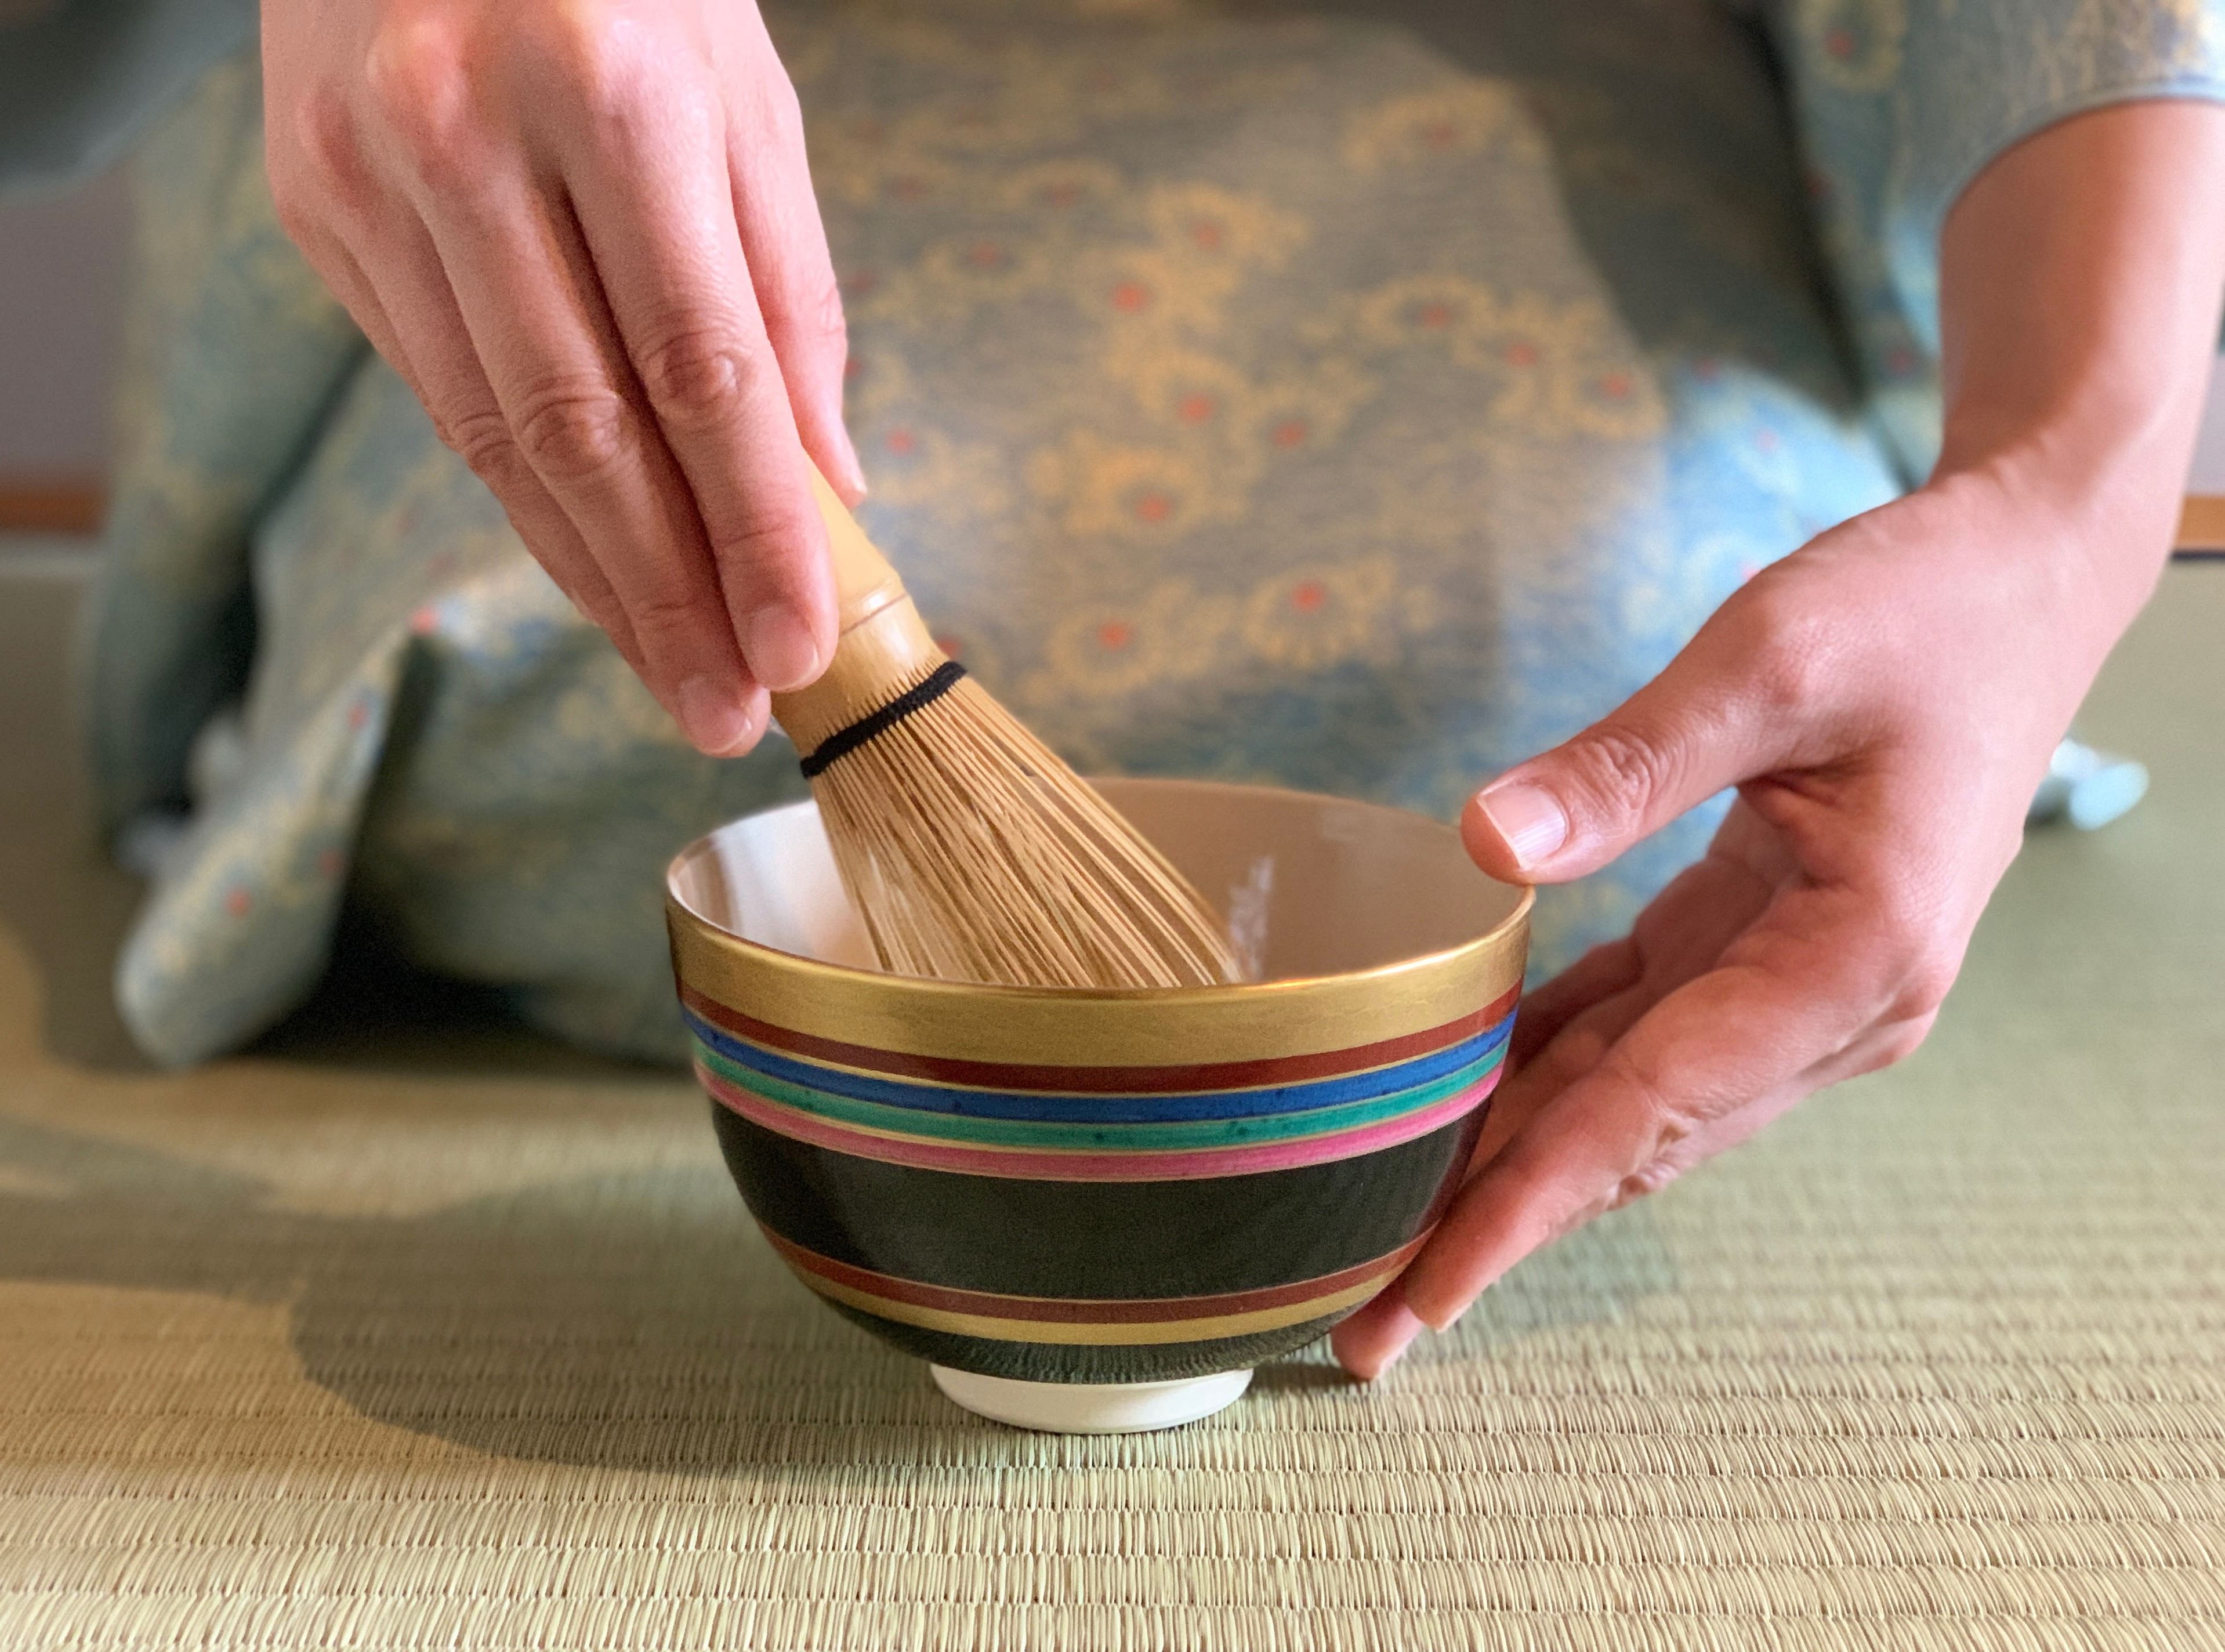 Flower Teahouse - Private Tea Ceremony Experience